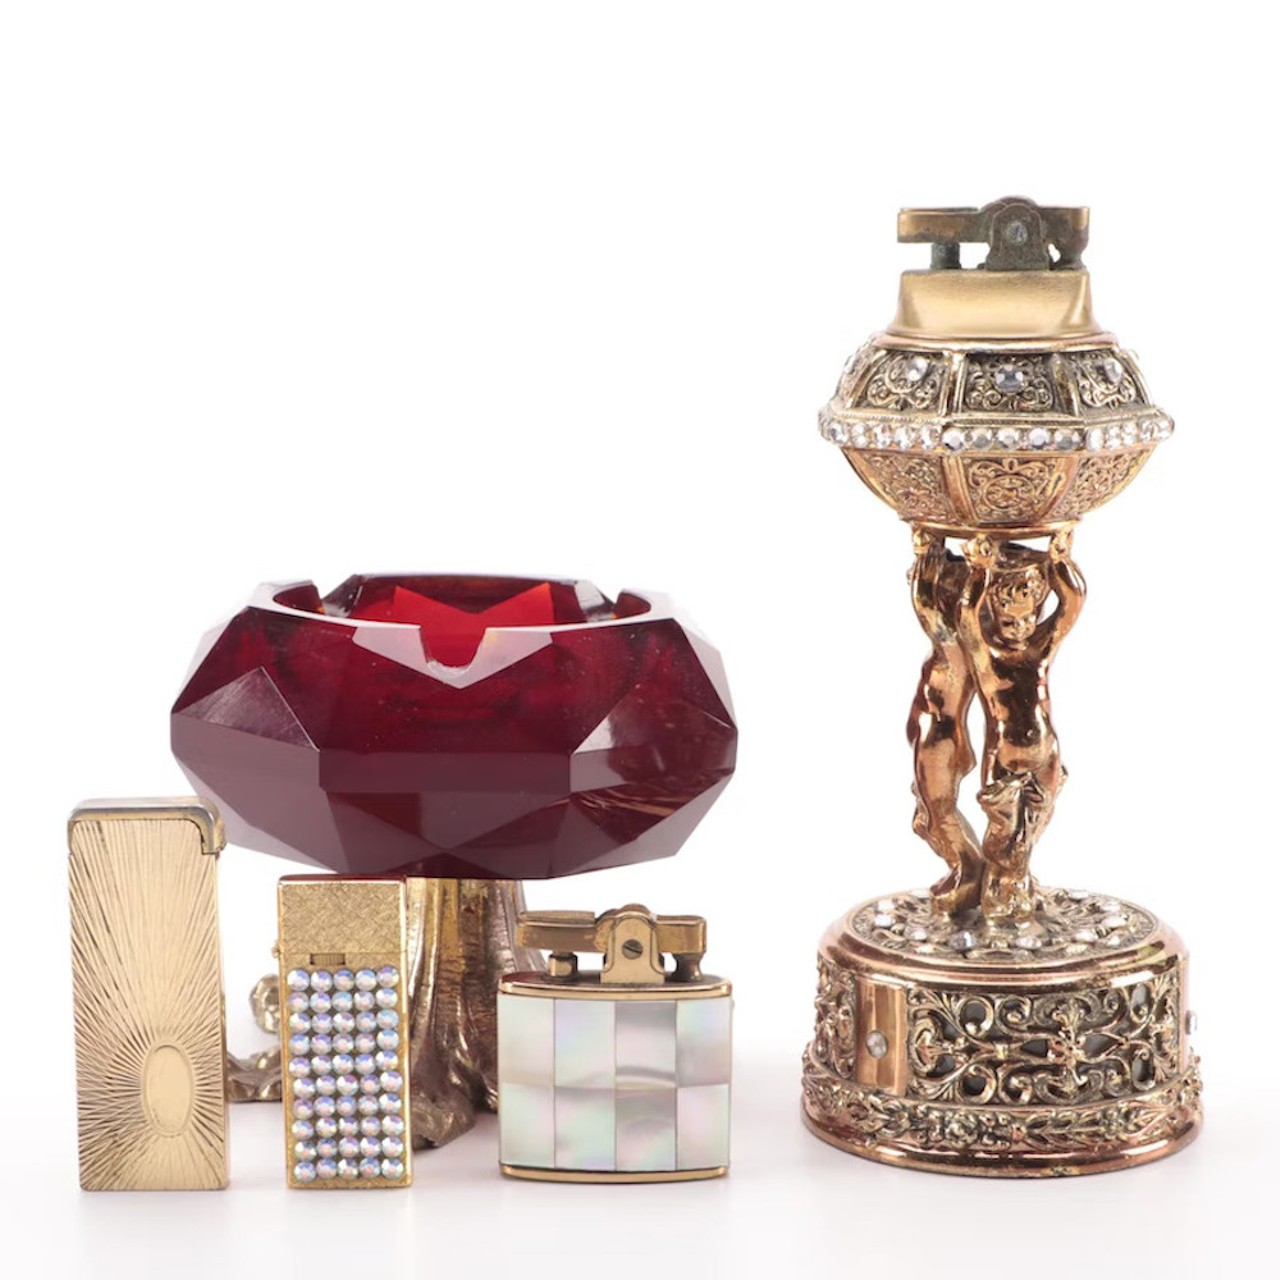 Pedestal Glass Ashtray with Table and Other Lighters
Be the star of your smoking circle’s Secret Santa. These vintage Japanese smoking accessories are a stylish upgrade from your run-of-the-mill Urban Outfitters ashtray. The dramatic, gilded table lighter even plays music.